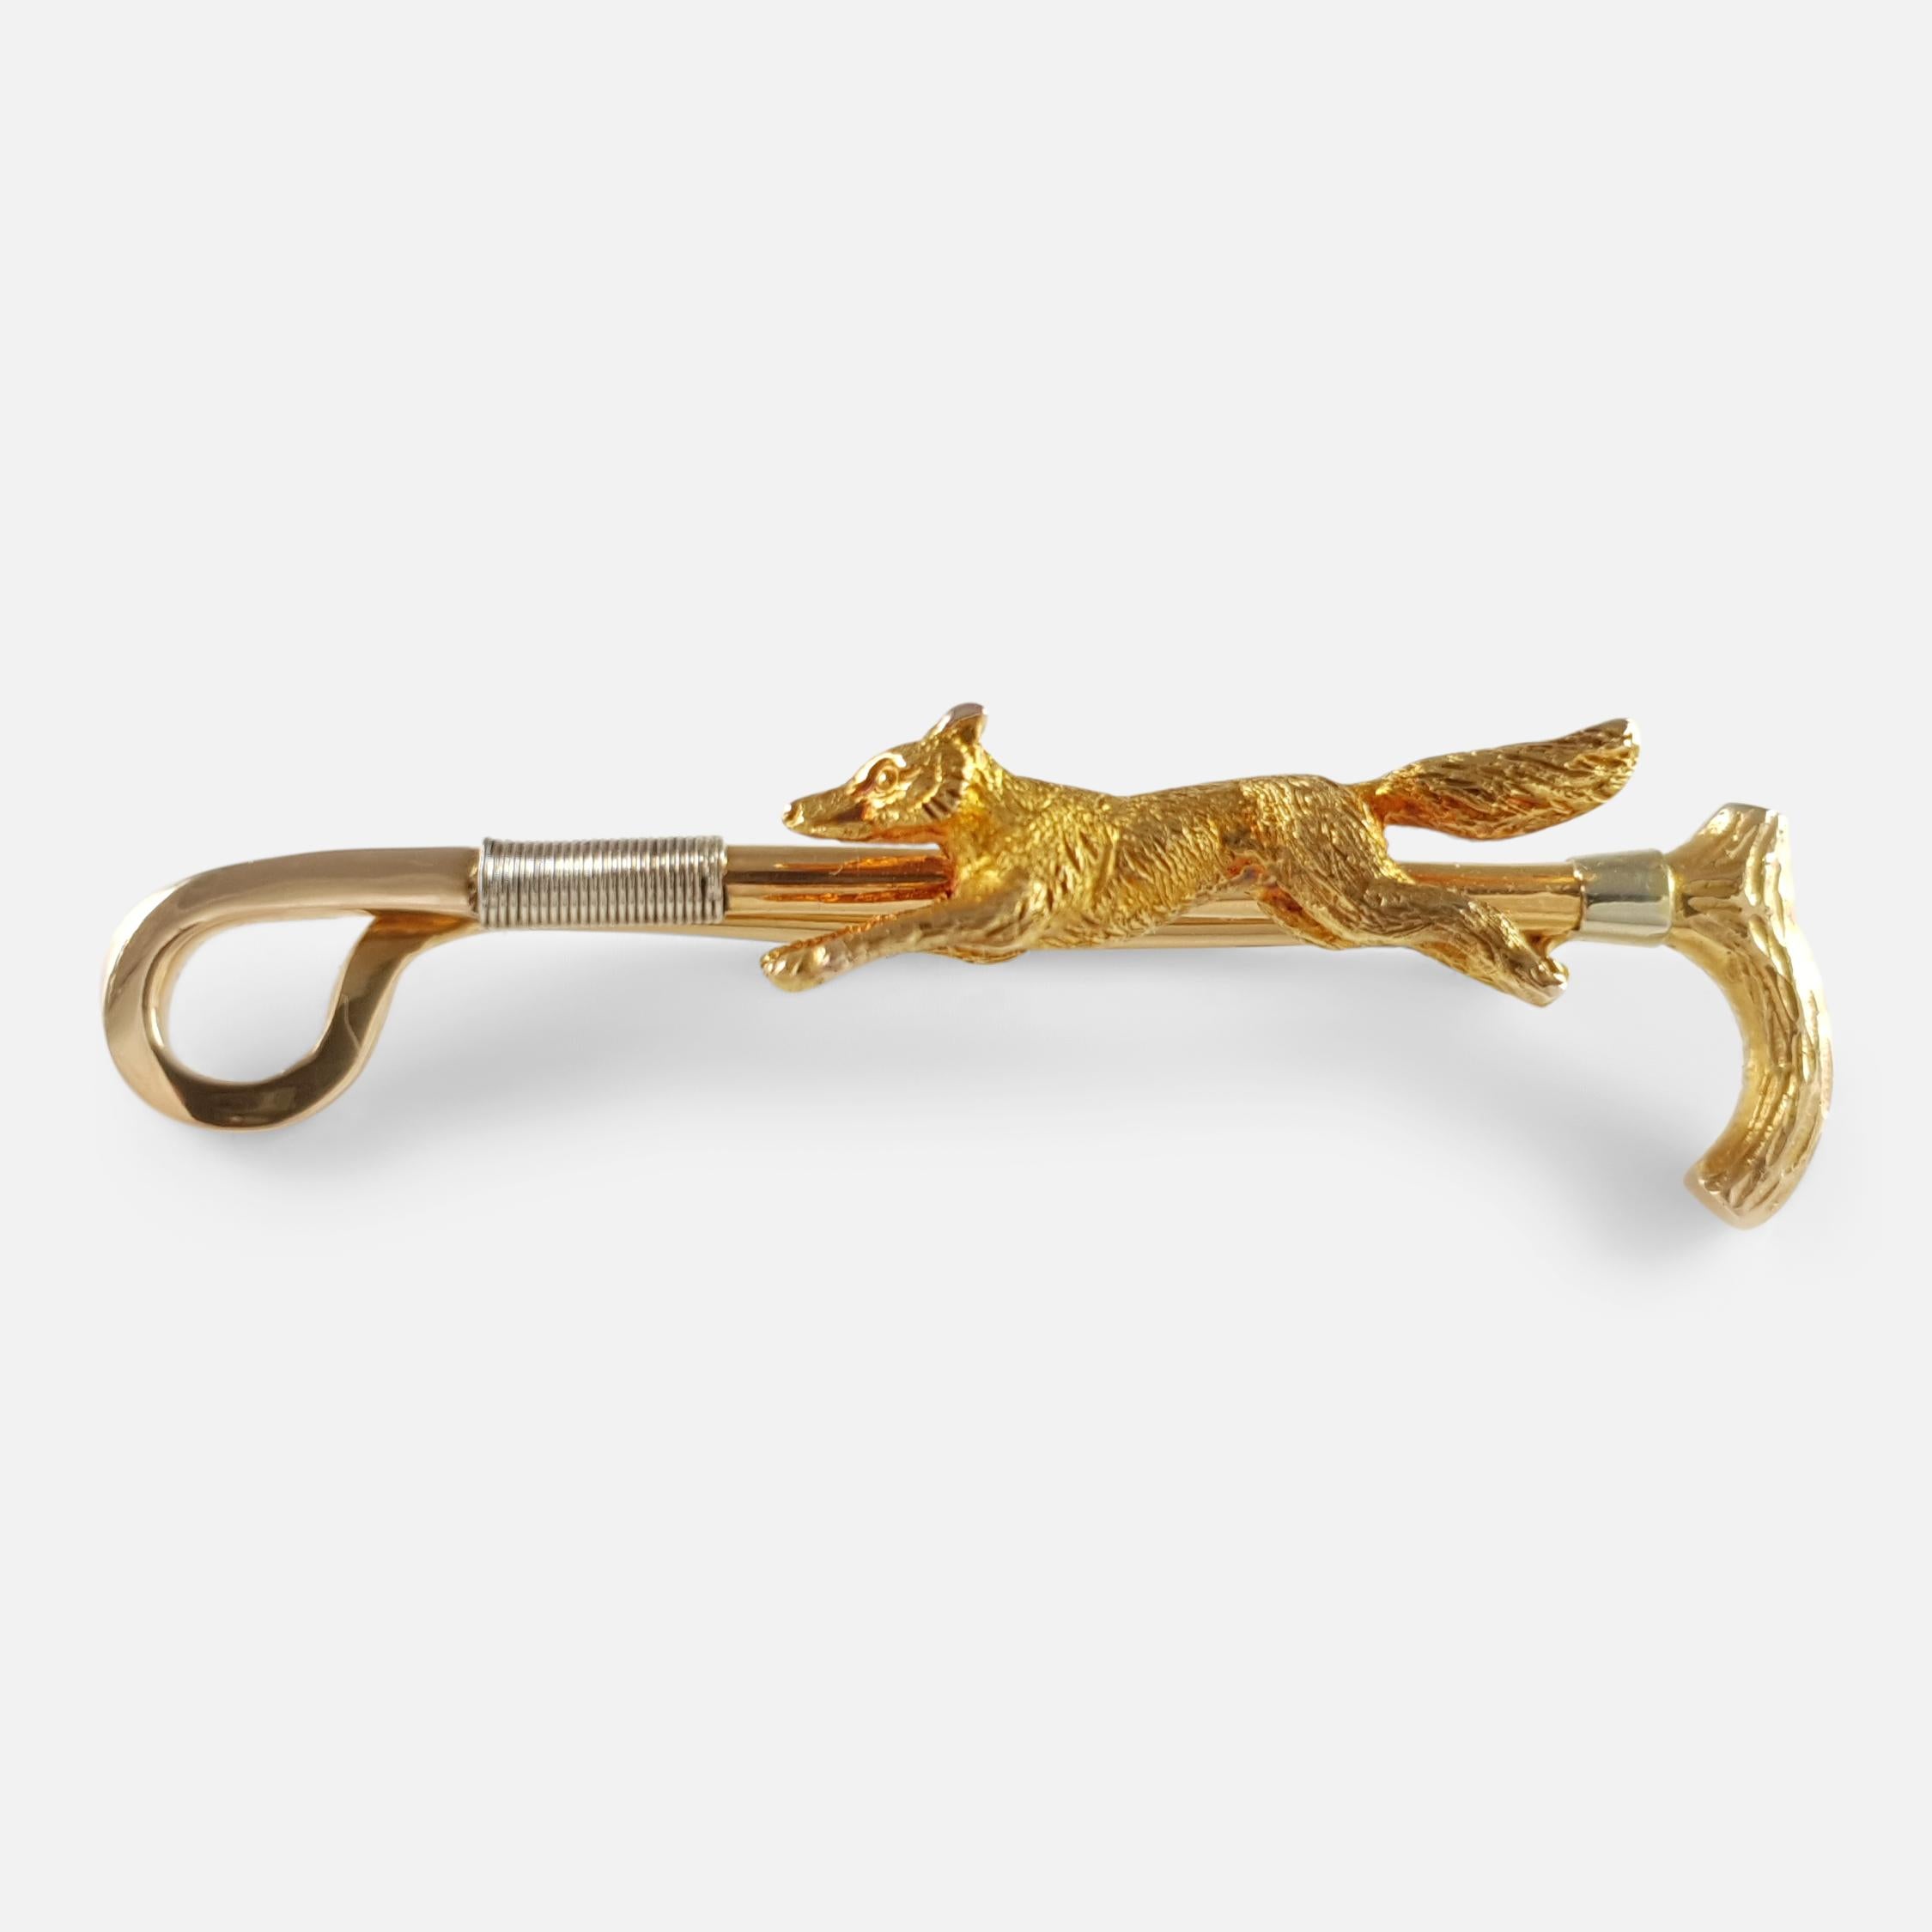 Description: - This is a beautiful 15 karat gold fox hunting brooch stock pin.  The brooch is crafted in the form of a fox in full flight with a riding crop in the background. The brooch is stamped 